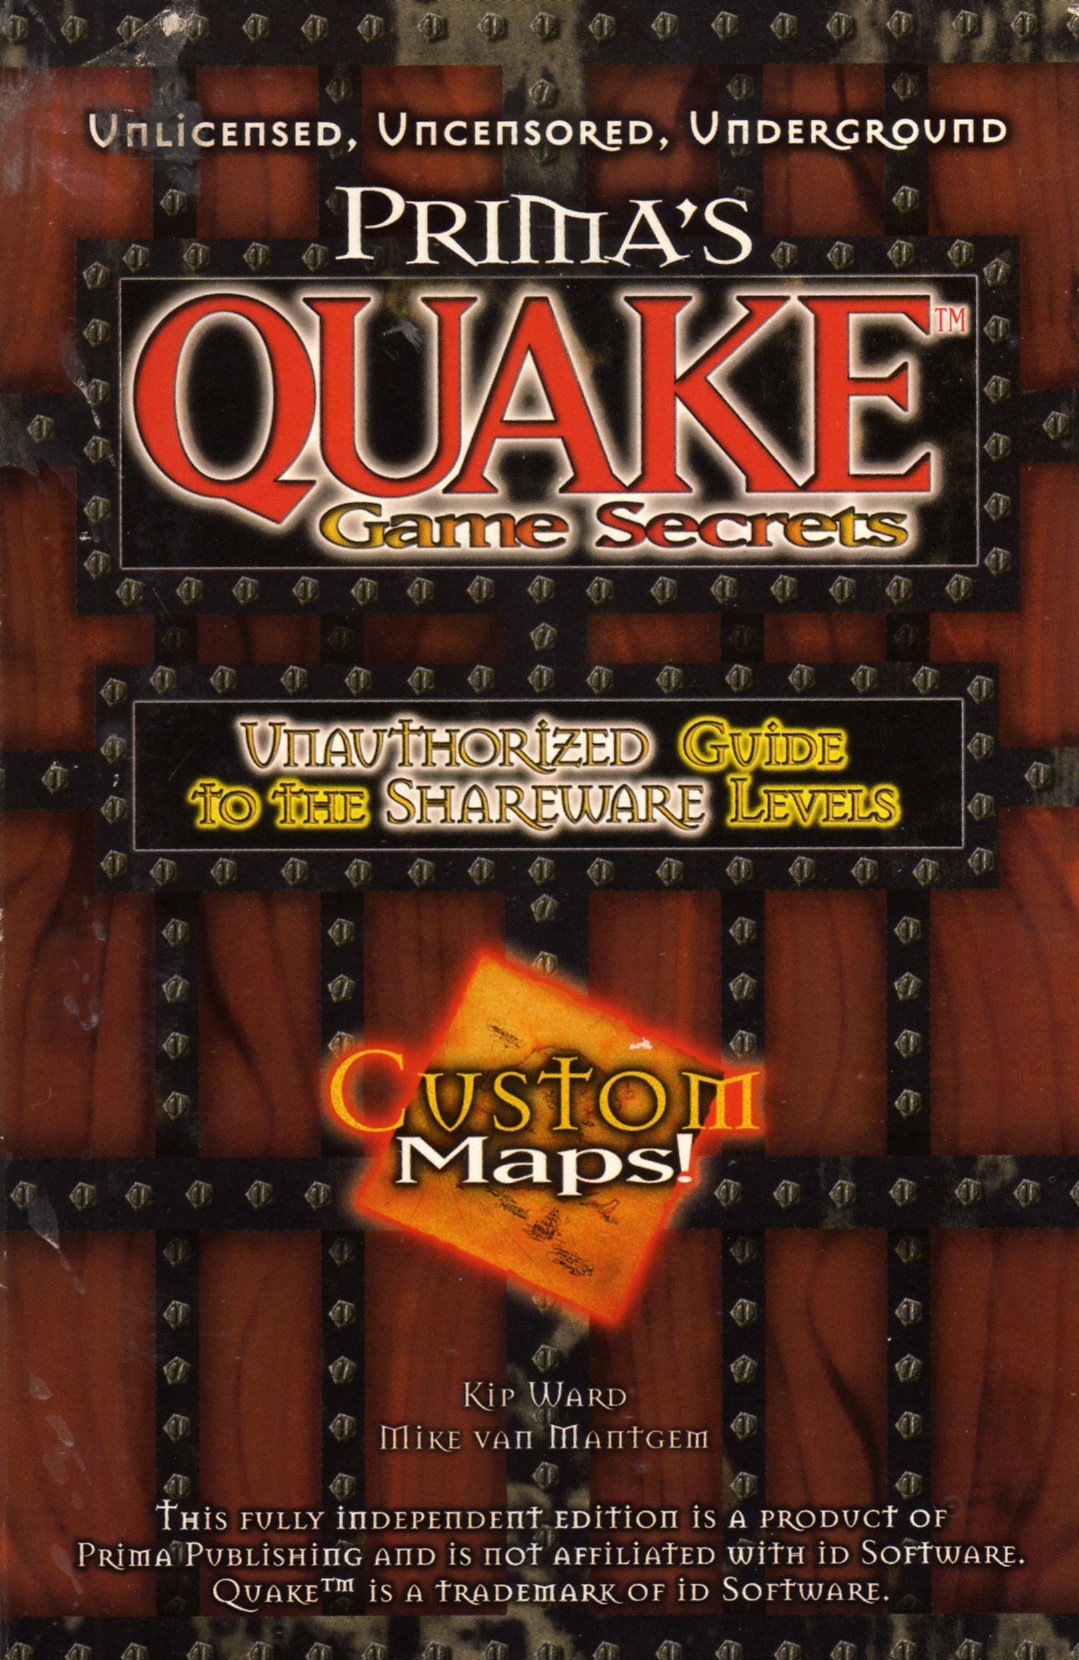 More information about "Quake Game Secrets: Unauthorized Guide to the Shareware Levels"